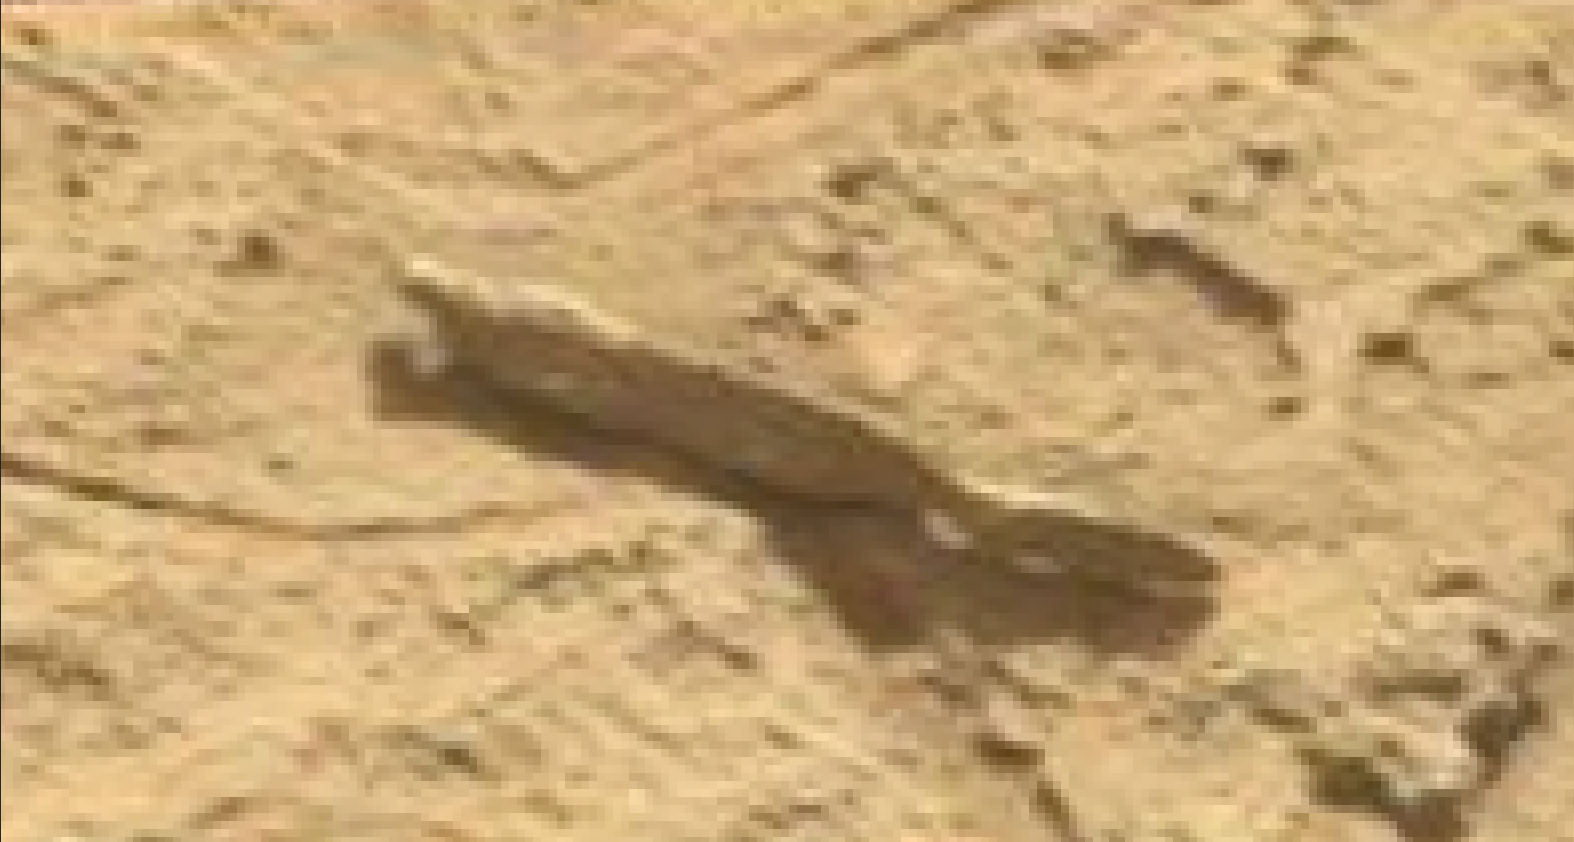 mars sol 1302 anomaly-artifacts 3 was life on mars